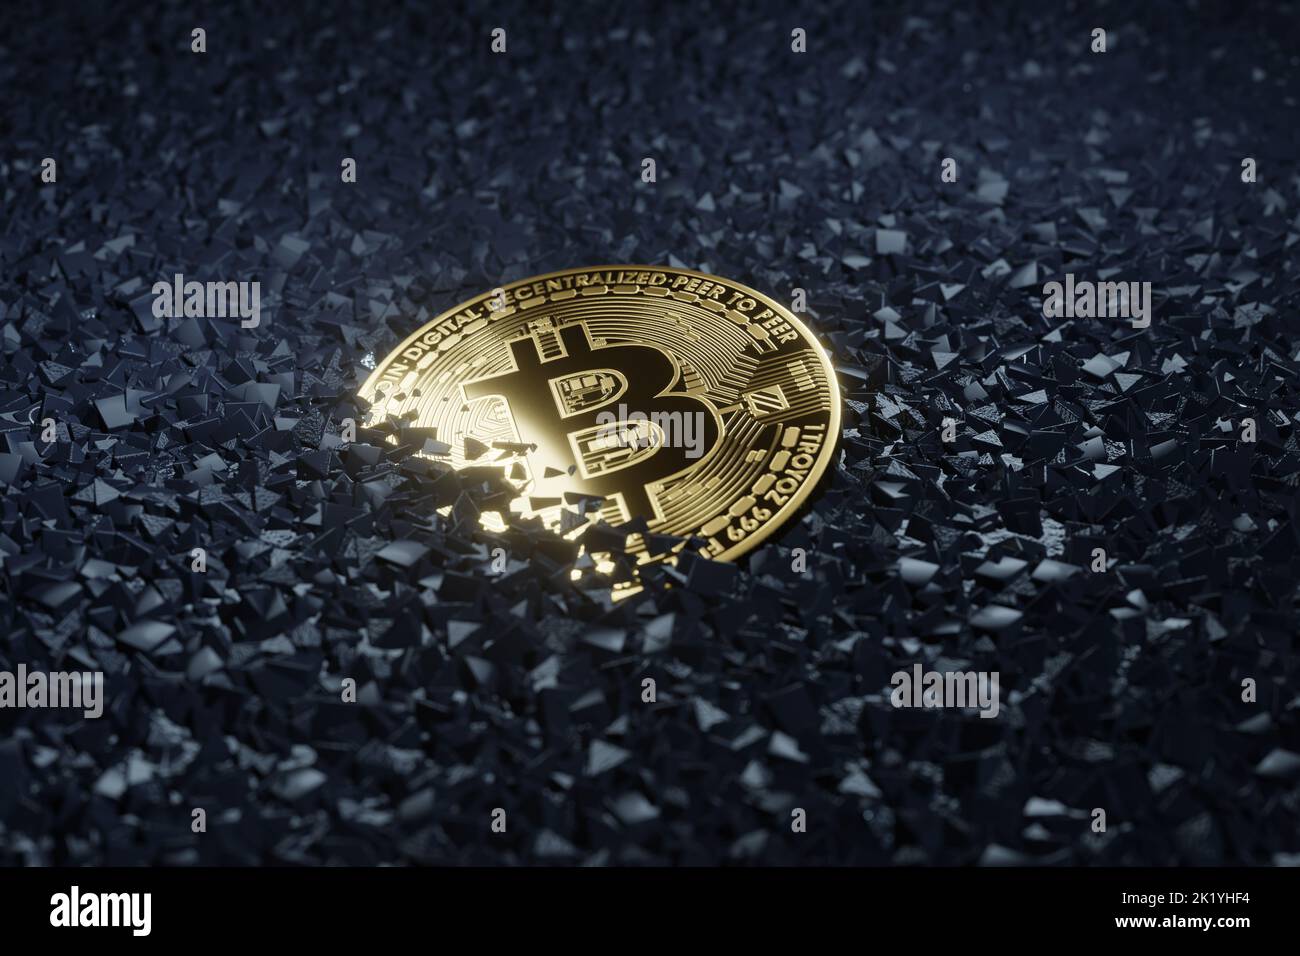 Golden bitcoin buried in black gemstones. Illustration of the concept of cryptocurrency mining Stock Photo